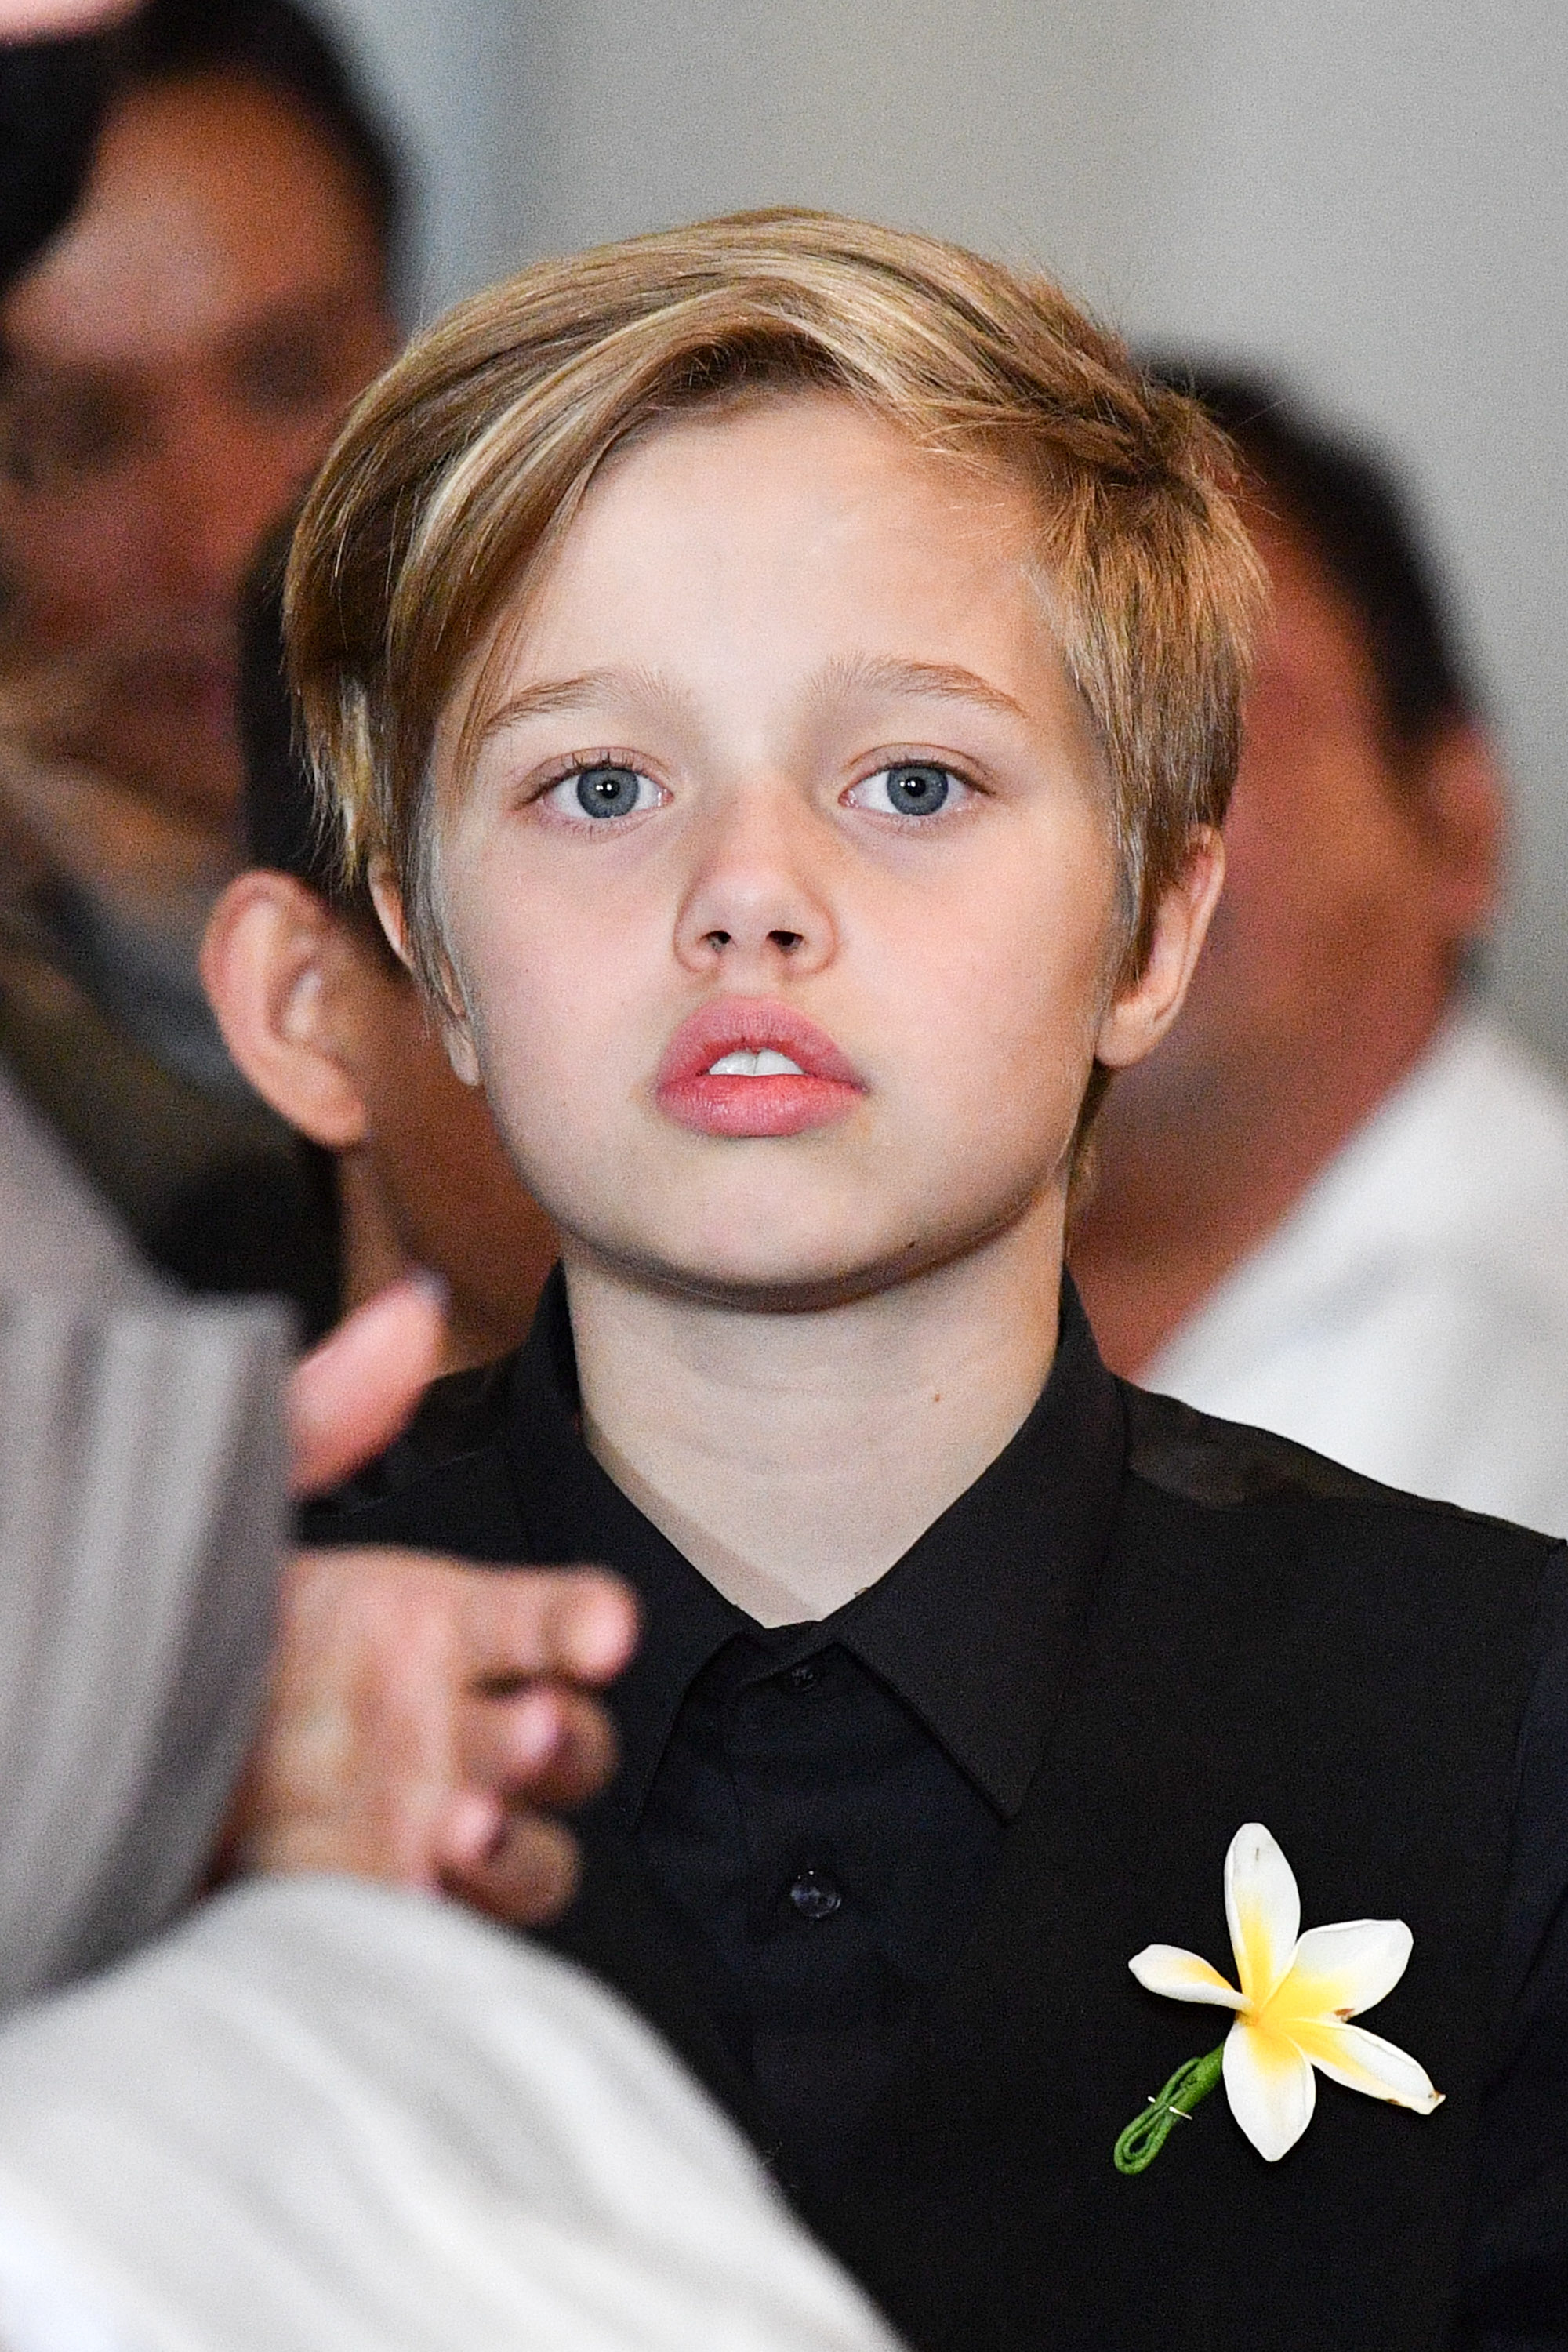 Shiloh Jolie Pitt Haircut What Hairstyle Is Best For Me